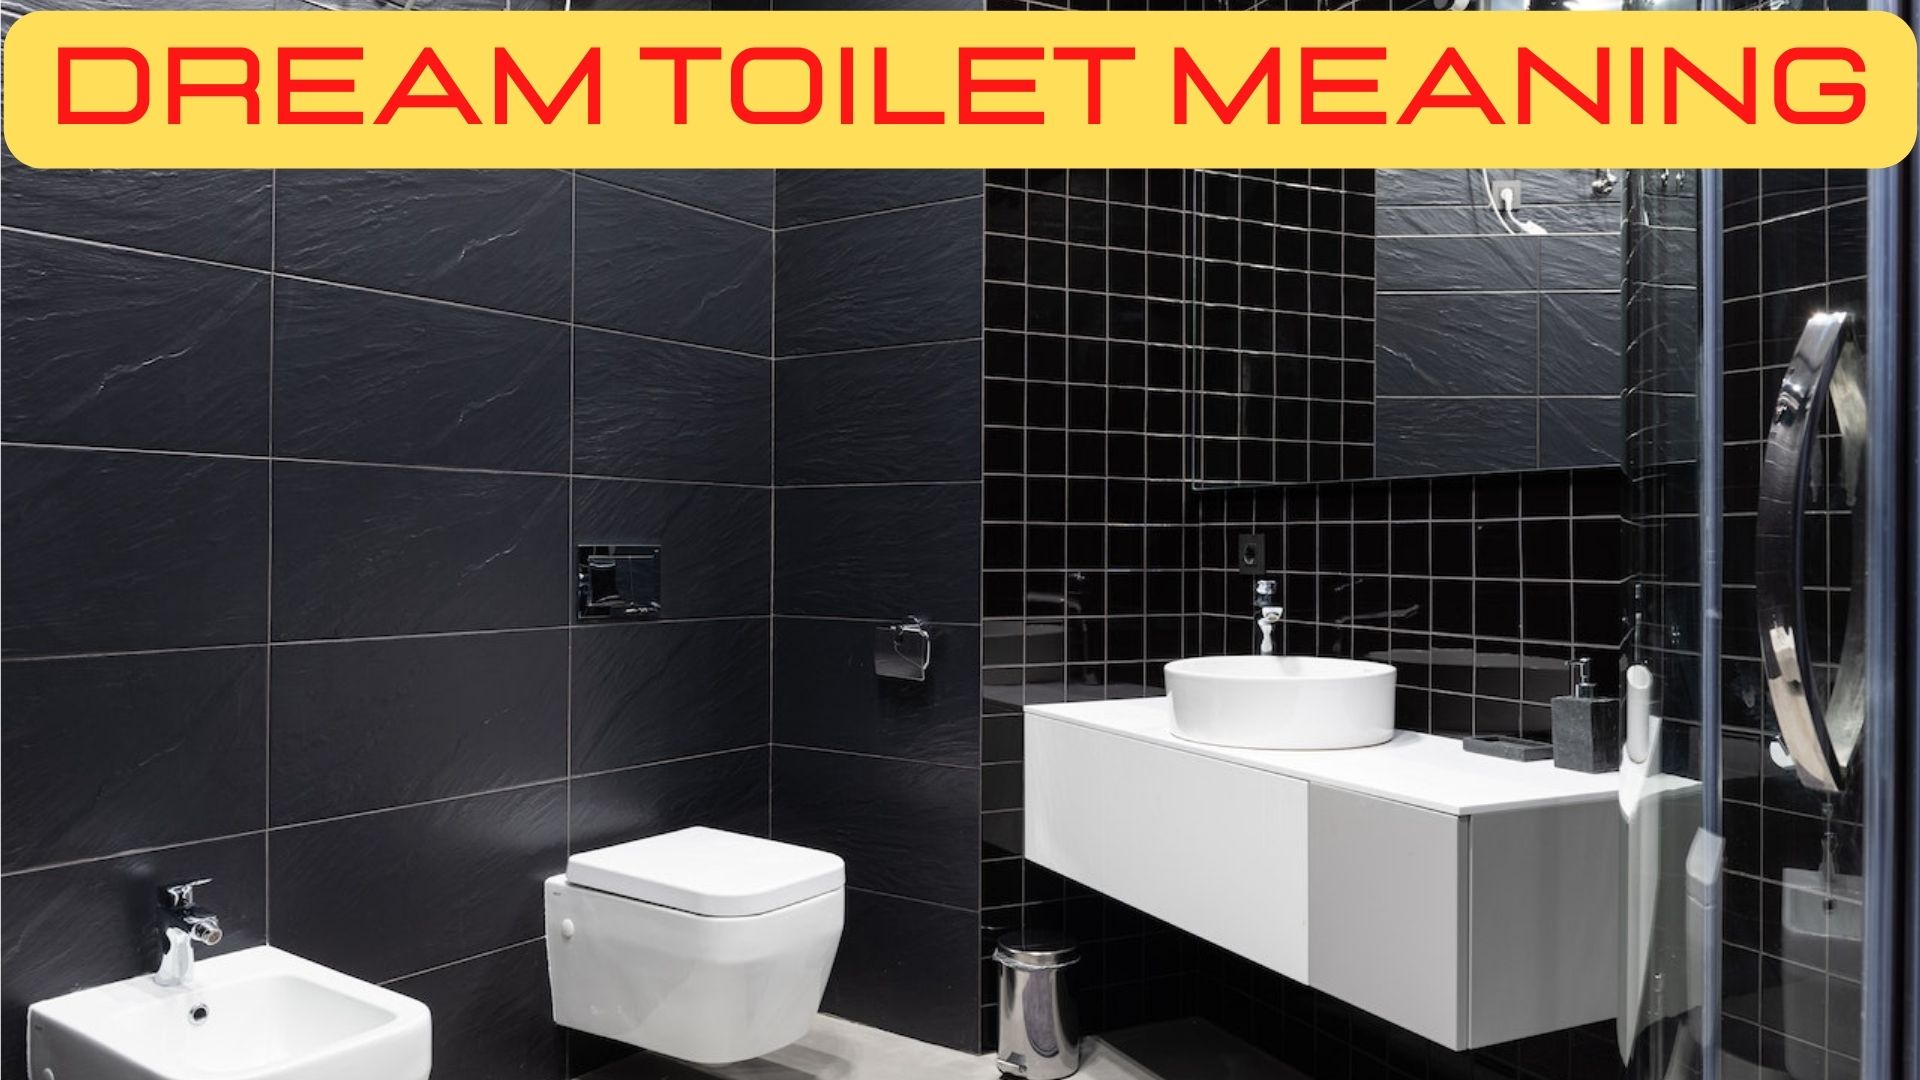 Dream Toilet Meaning Symbolizes A Release Of Emotions